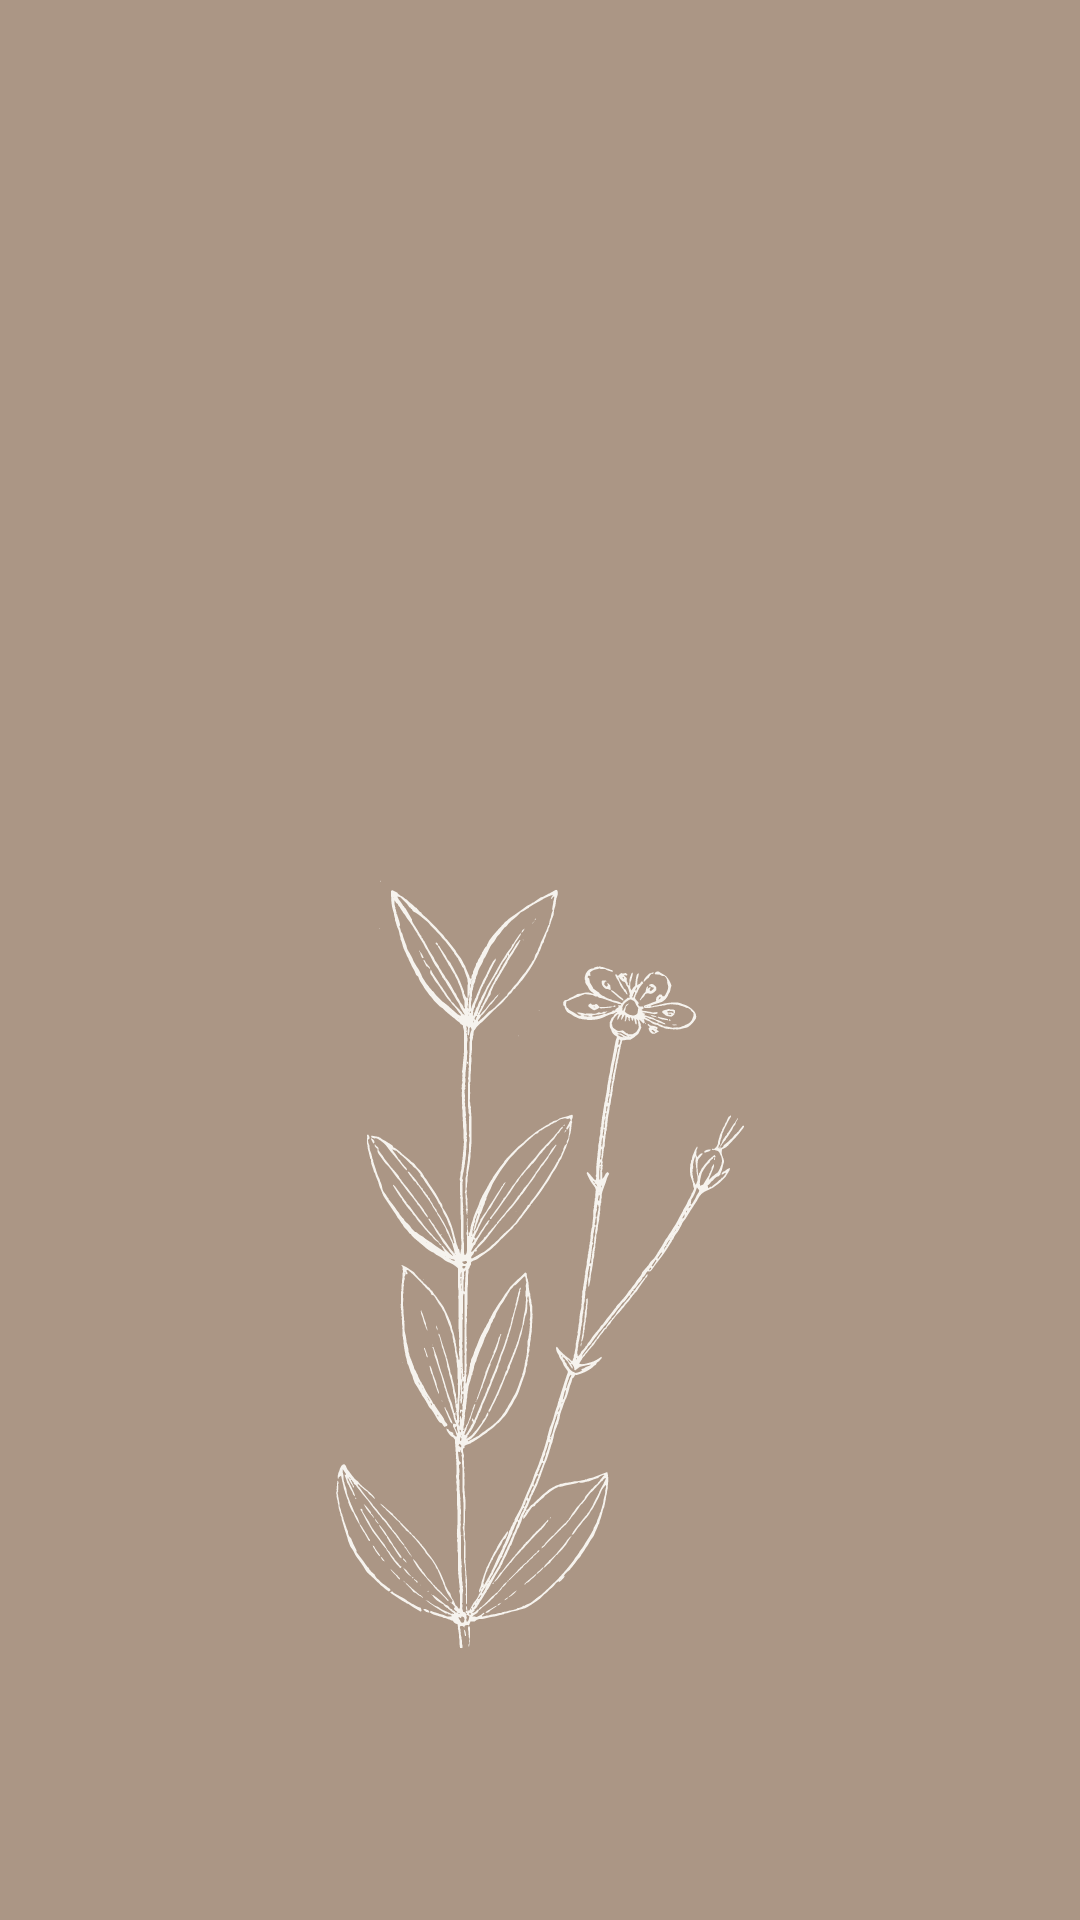 Free Aesthetic Phone Wallpapers for Spring